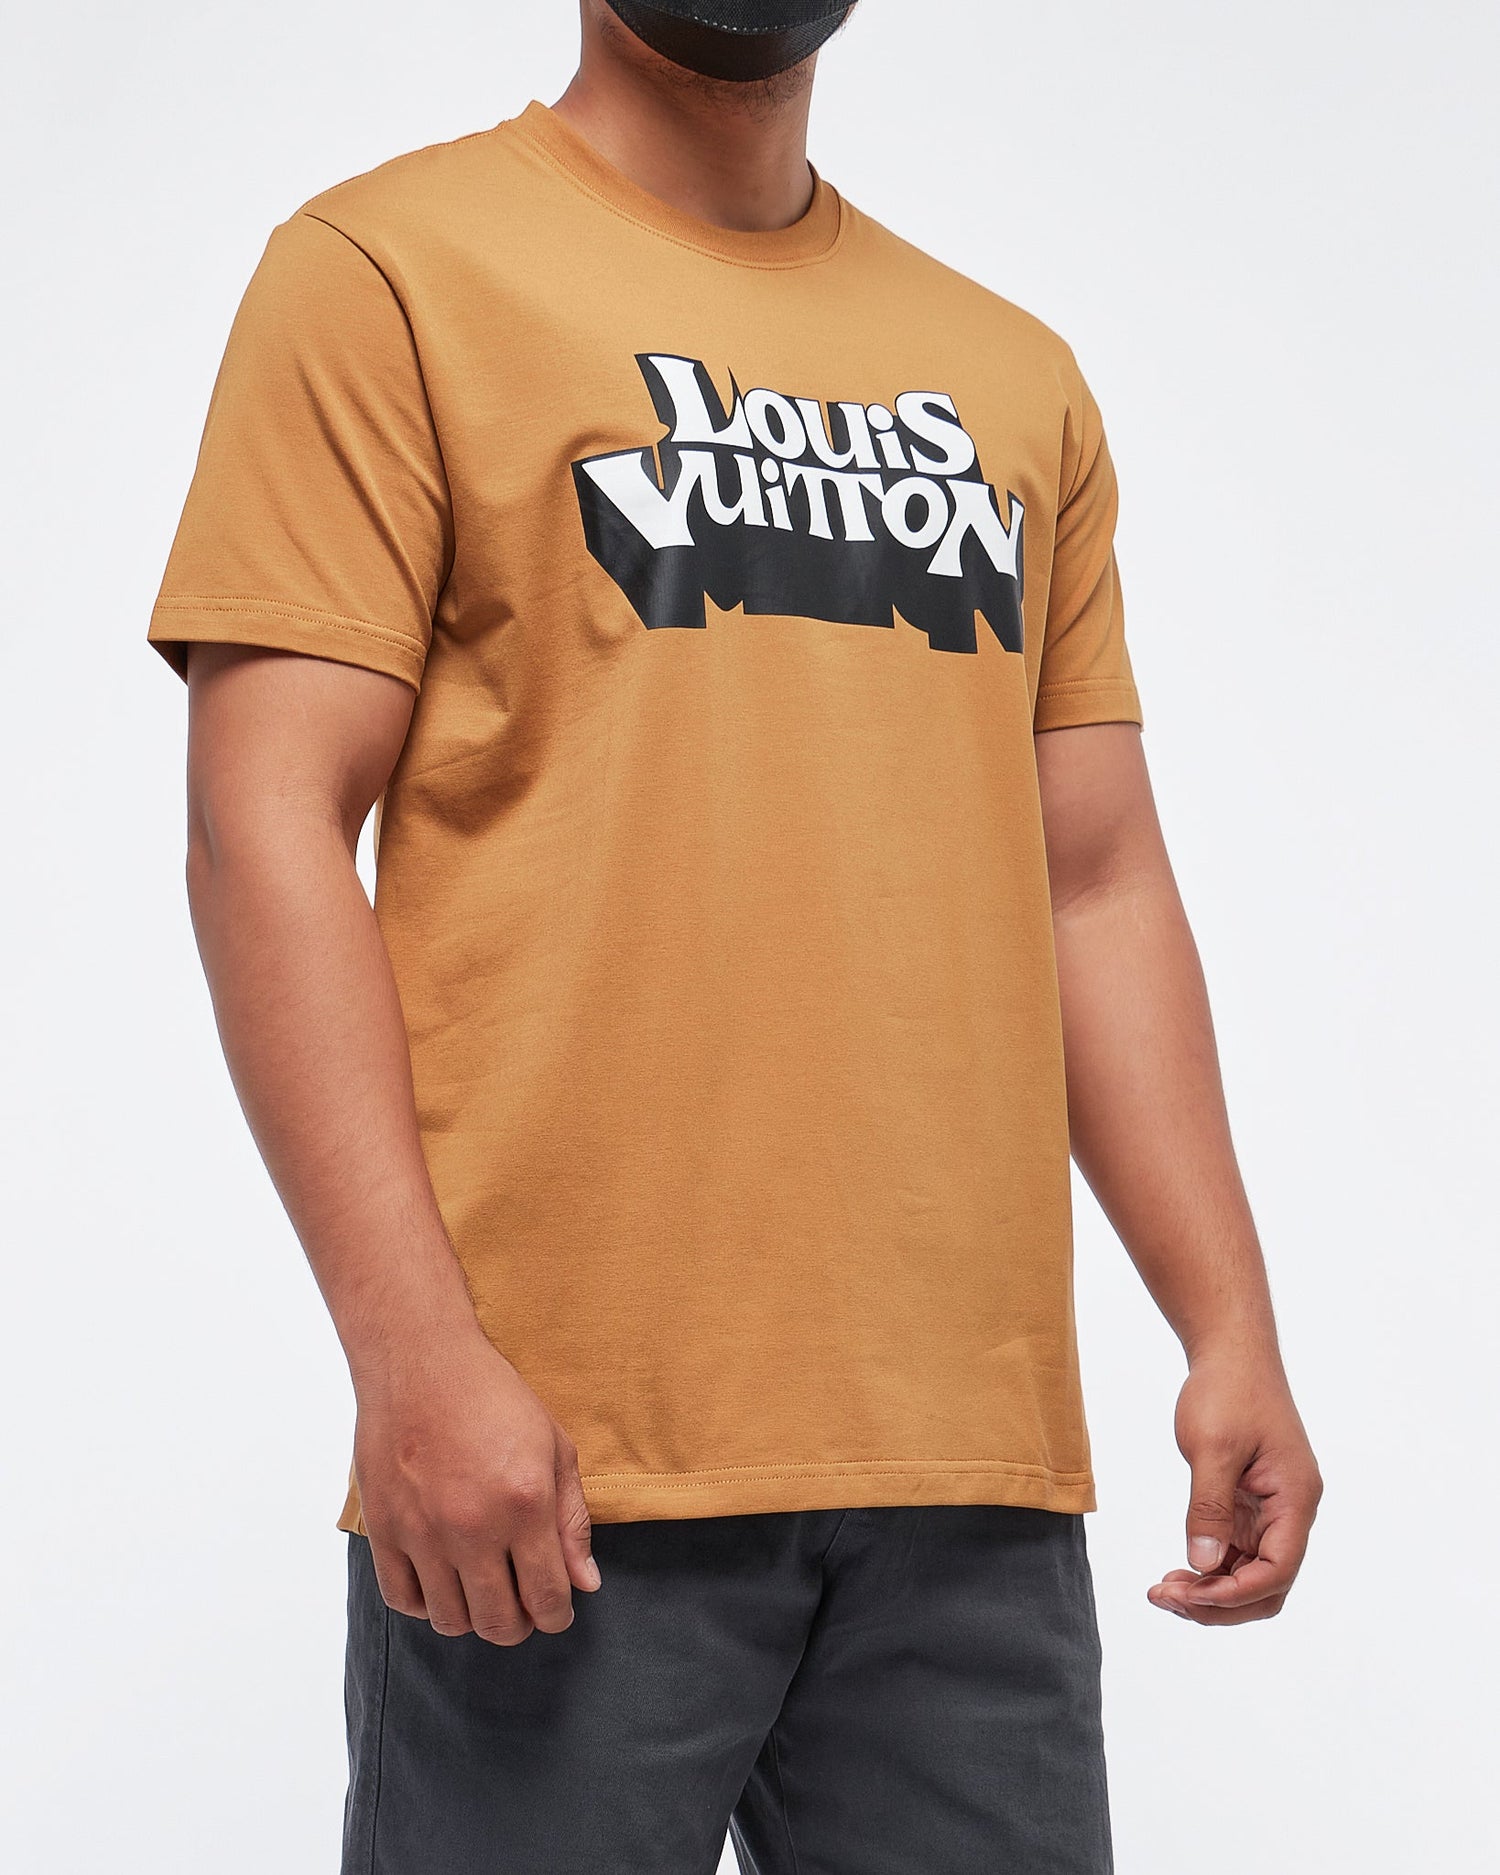 LV Cloudy Printed Men T-Shirt 52.90 - MOI OUTFIT